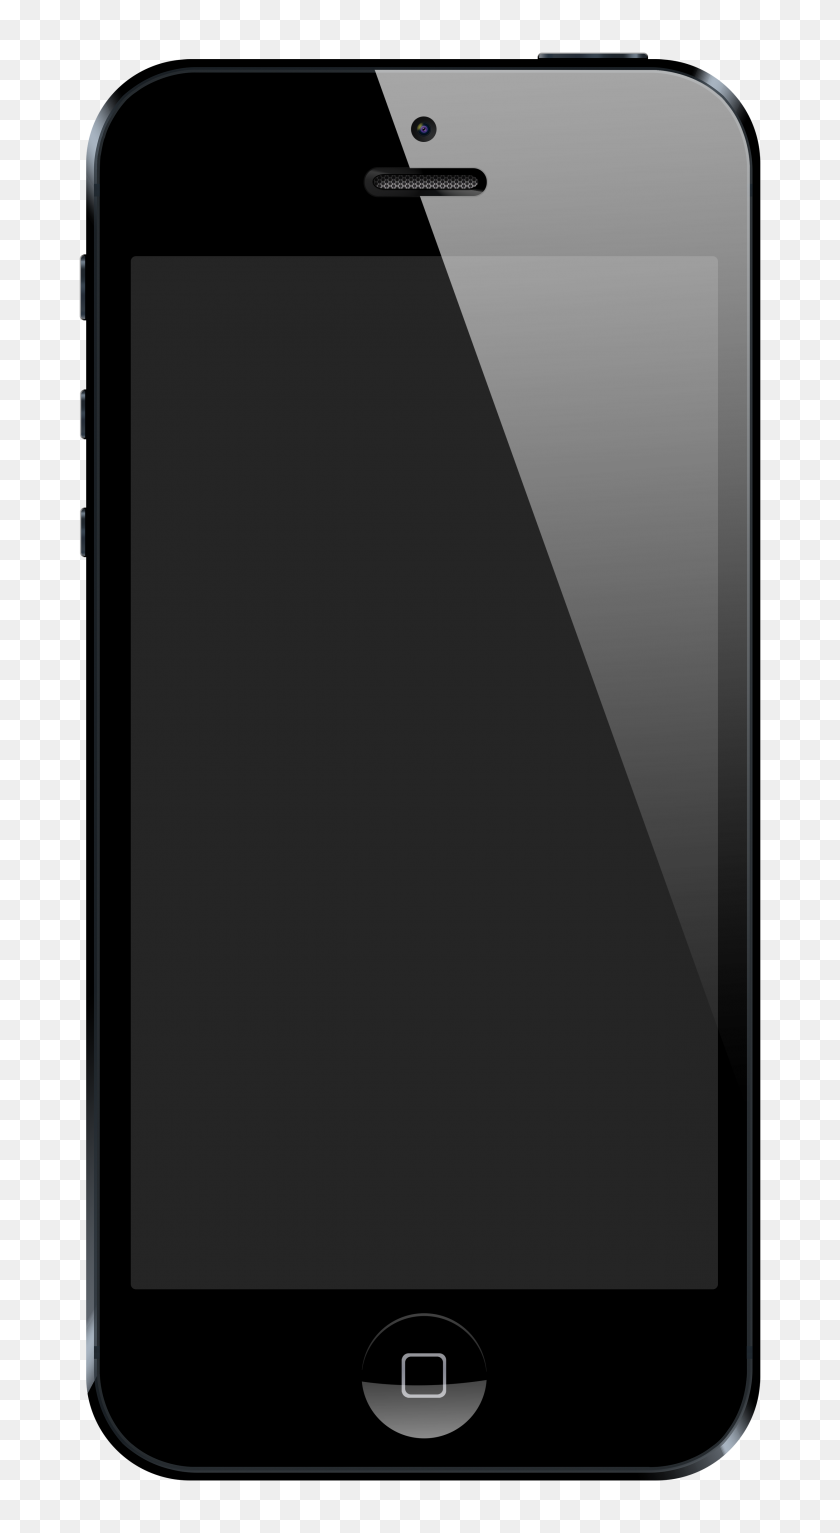 Iphone - Panel PNG